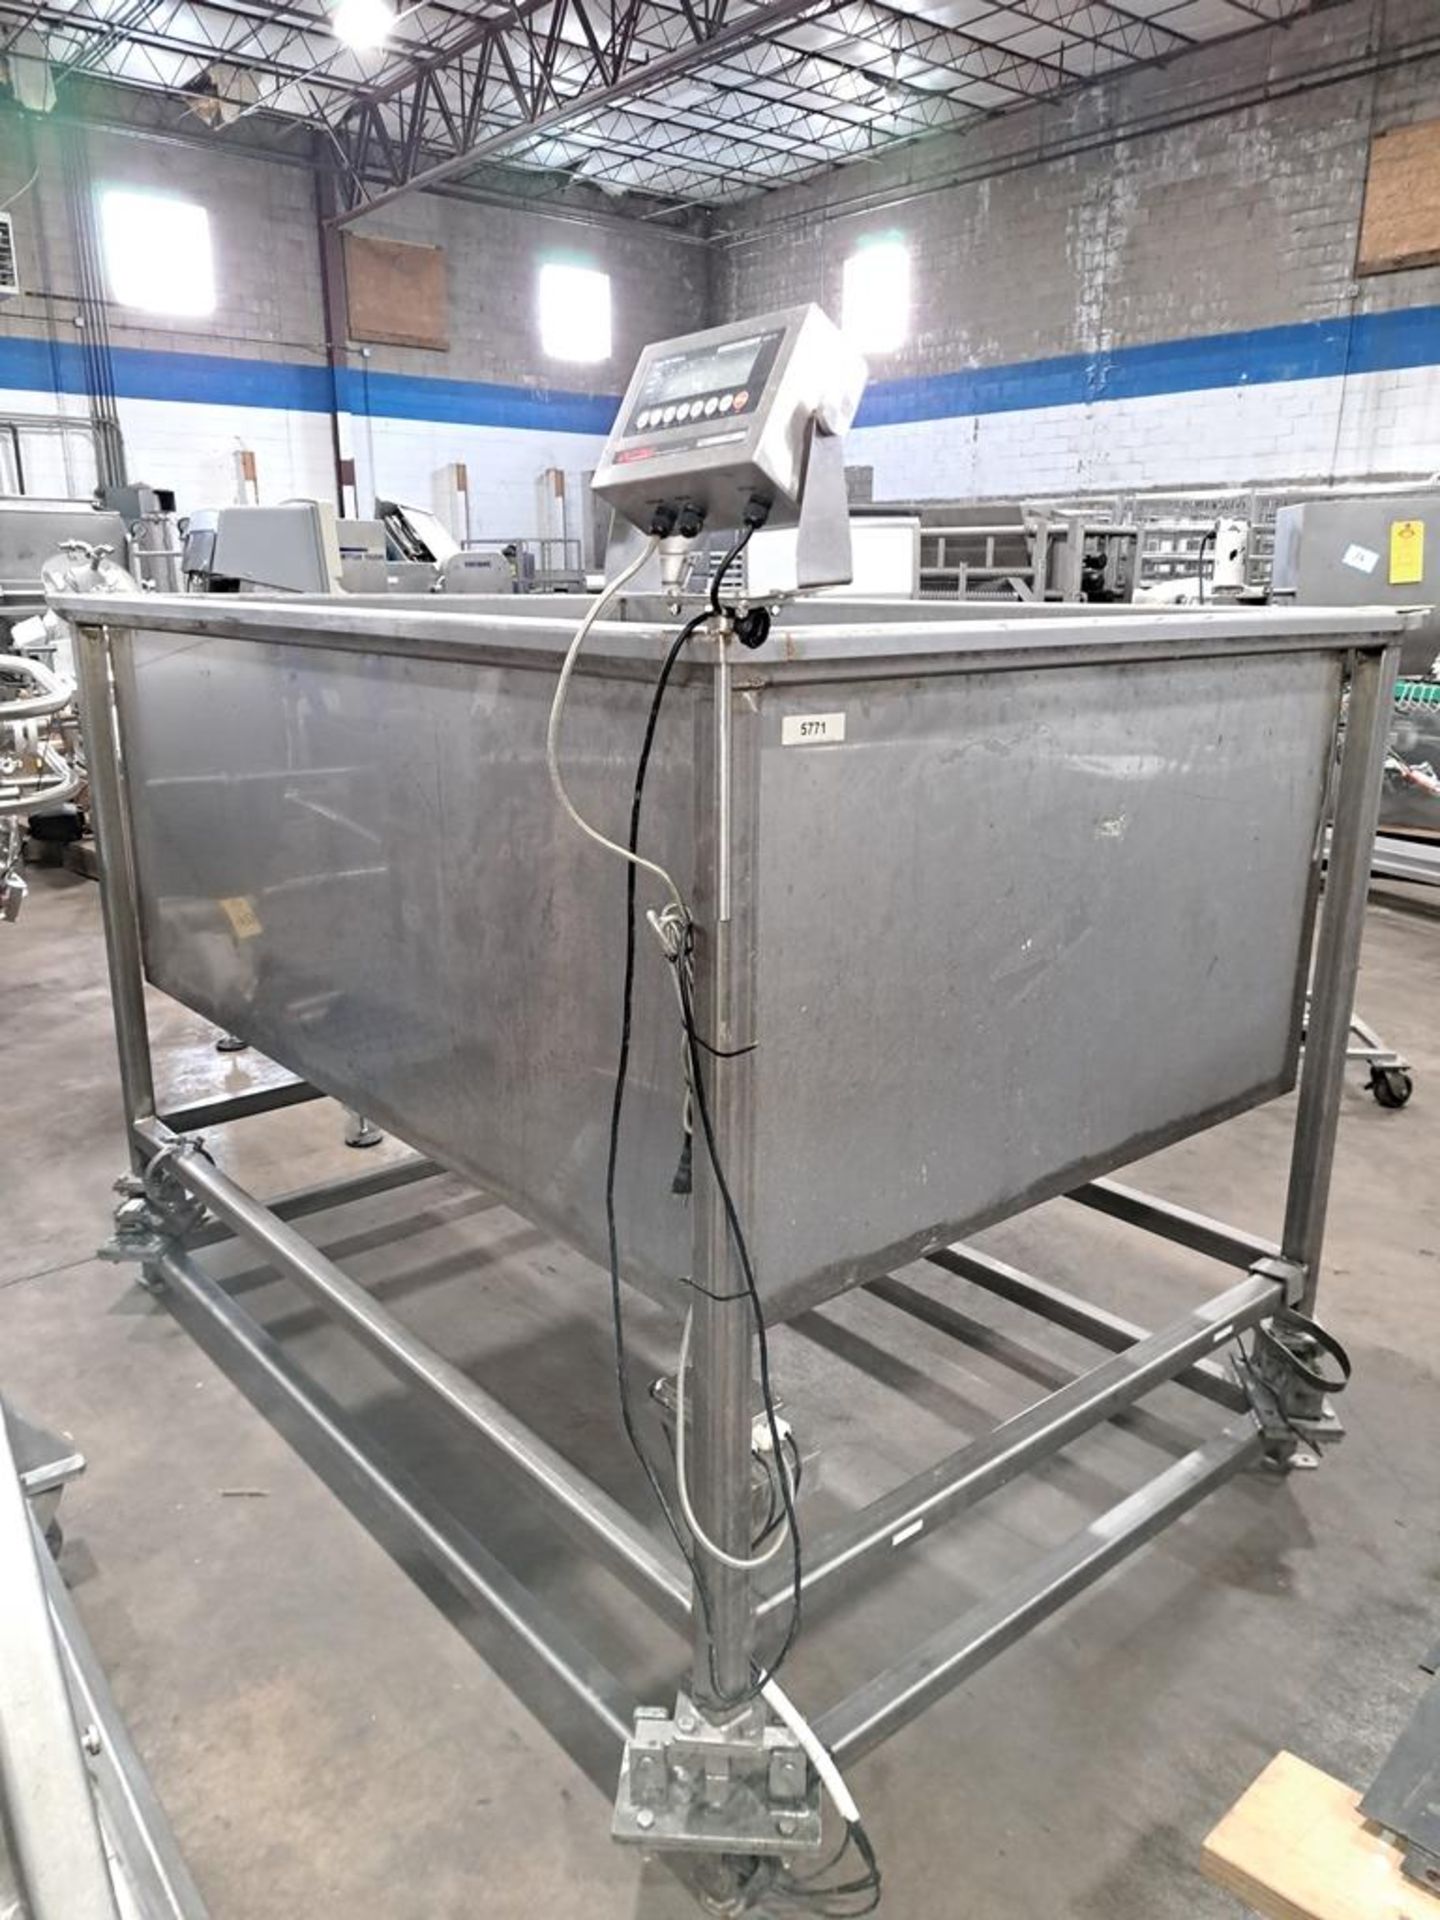 Stainless Steel Vacuum Load Hopper, 4' wide X 6' long X 40" deep tapered bottom, 4" outlet, Optima - Image 2 of 6